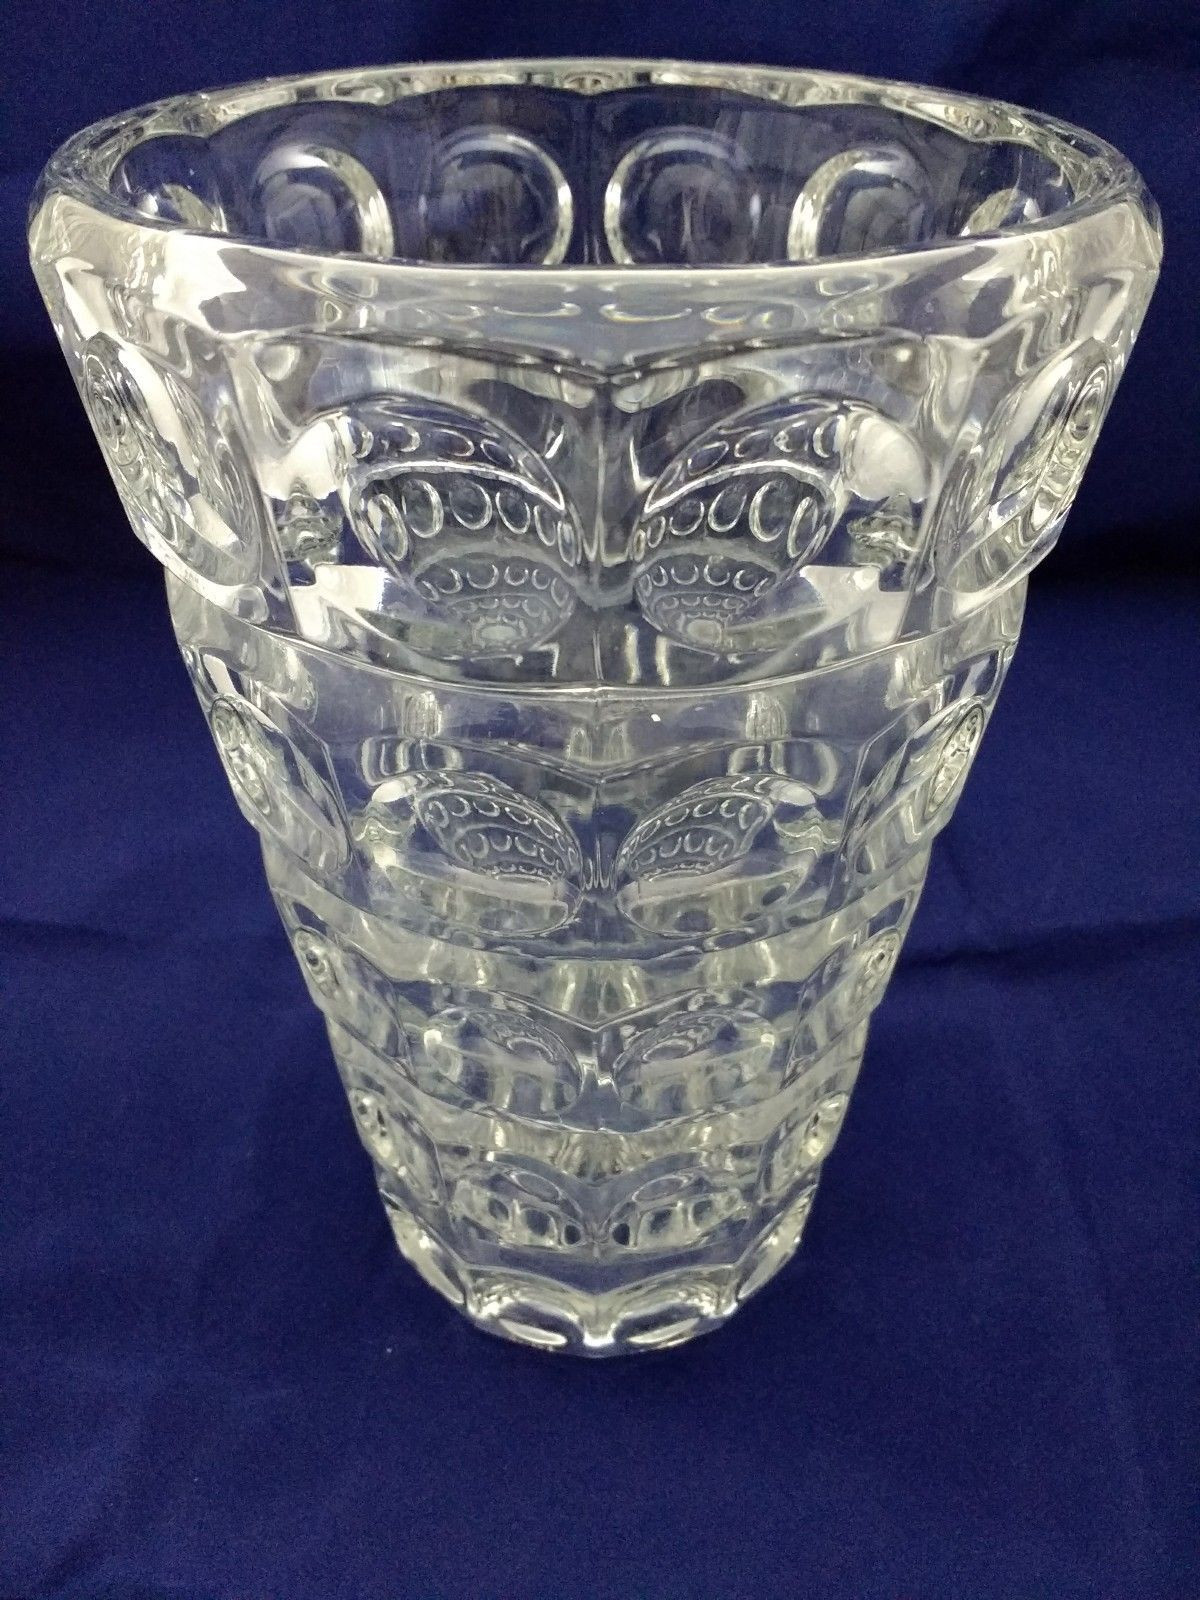 29 attractive Clear Glass Tulip Vase 2024 free download clear glass tulip vase of sklo union rosice lense vase rosice sklo remarkable glass from a regarding sklo union rosice lense vase ebay